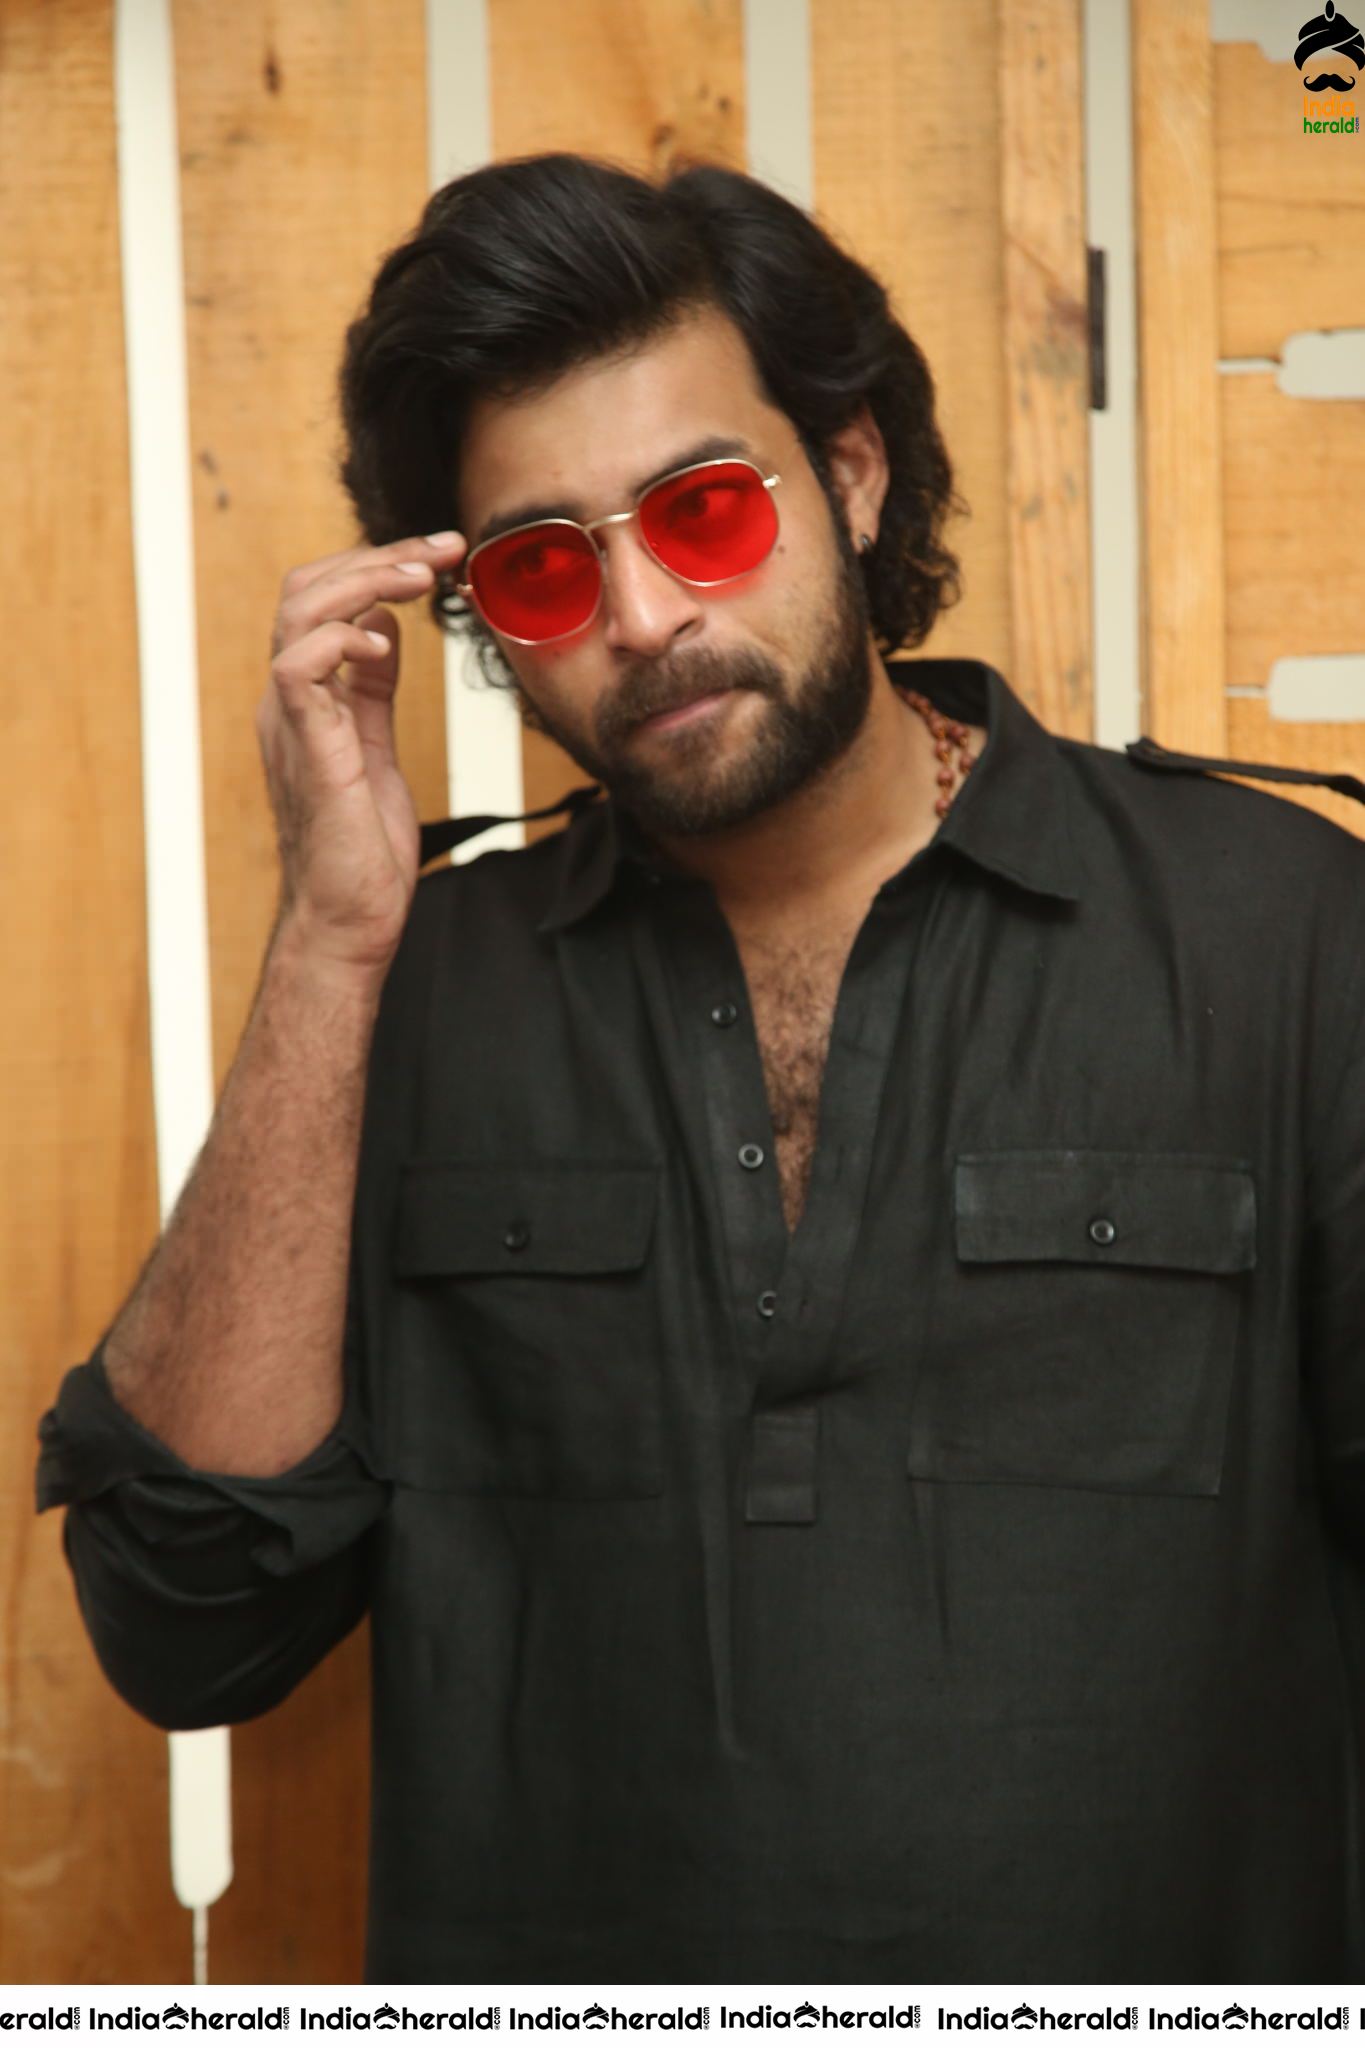 Varun Tej Looking Like a Handsome Hunk in these Photos Set 2